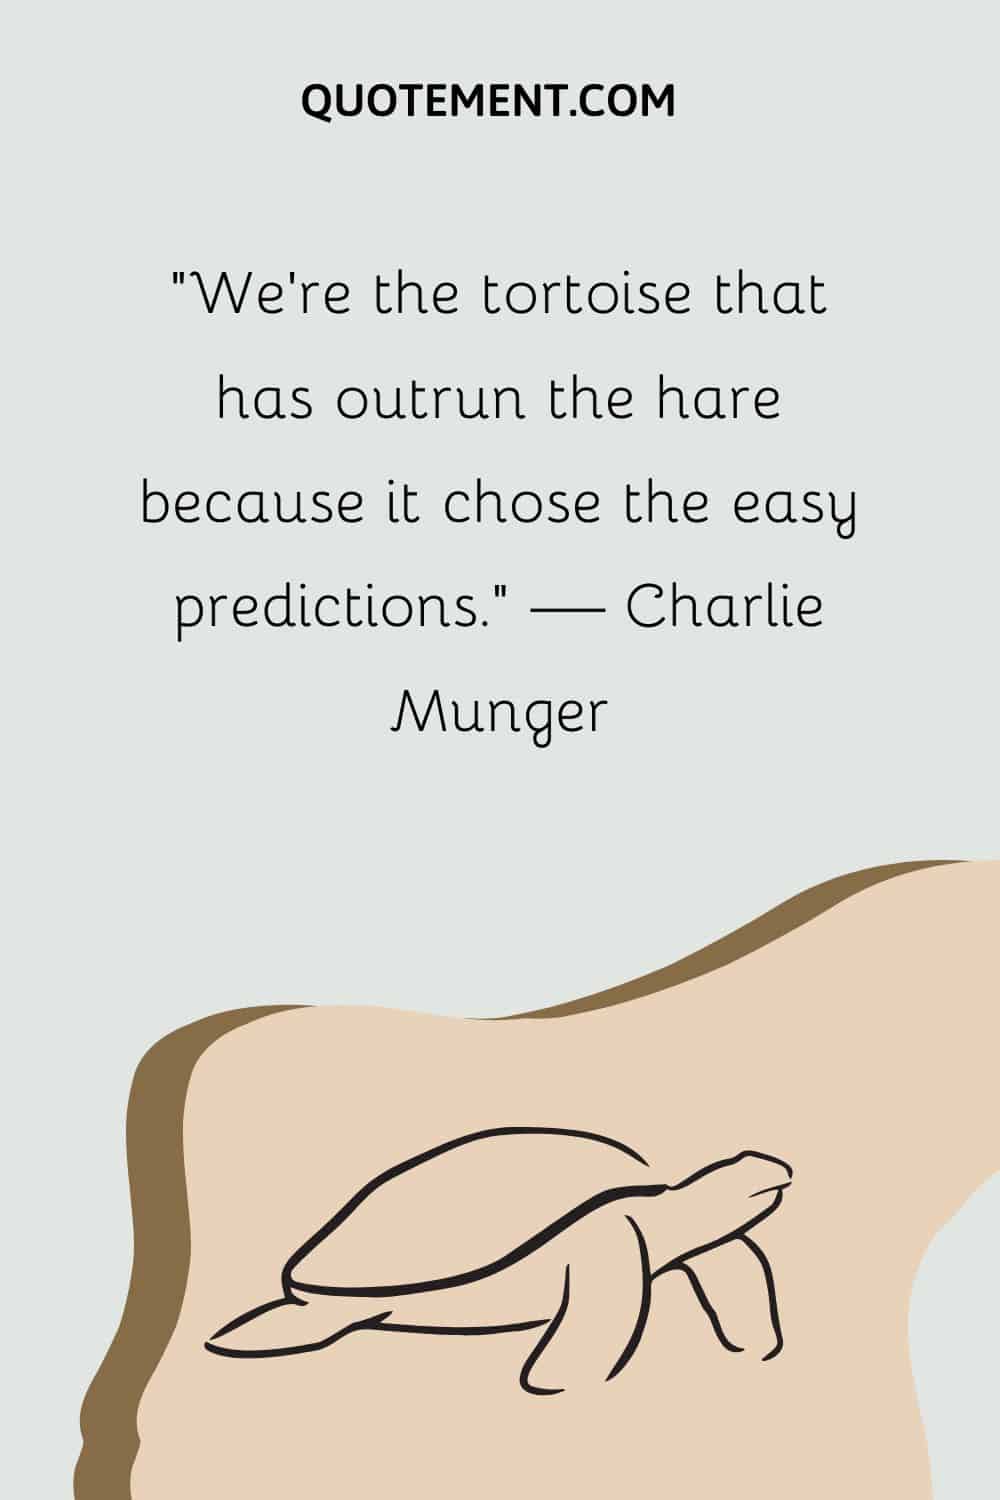 We’re the tortoise that has outrun the hare because it chose the easy predictions